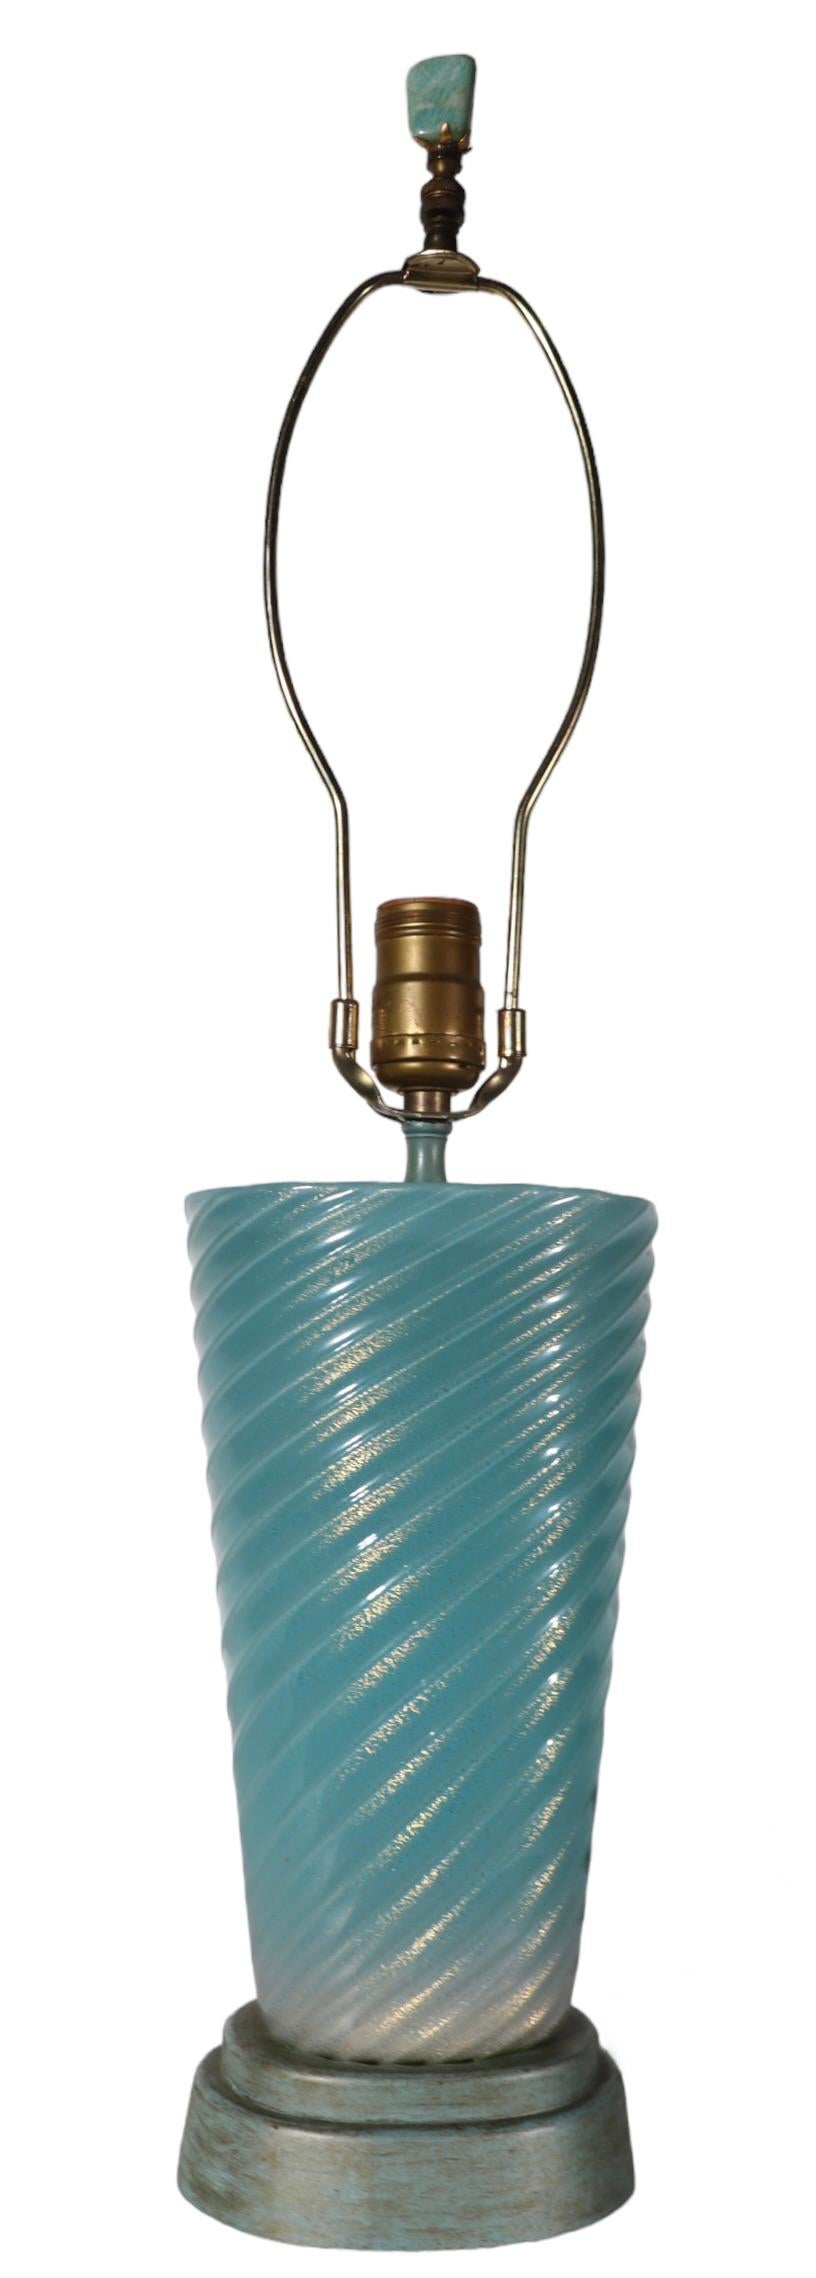 Murano Glass Lamp Blue Swirl with Gold Inclusion possibly Fratelli Toso, Seguso  For Sale 5